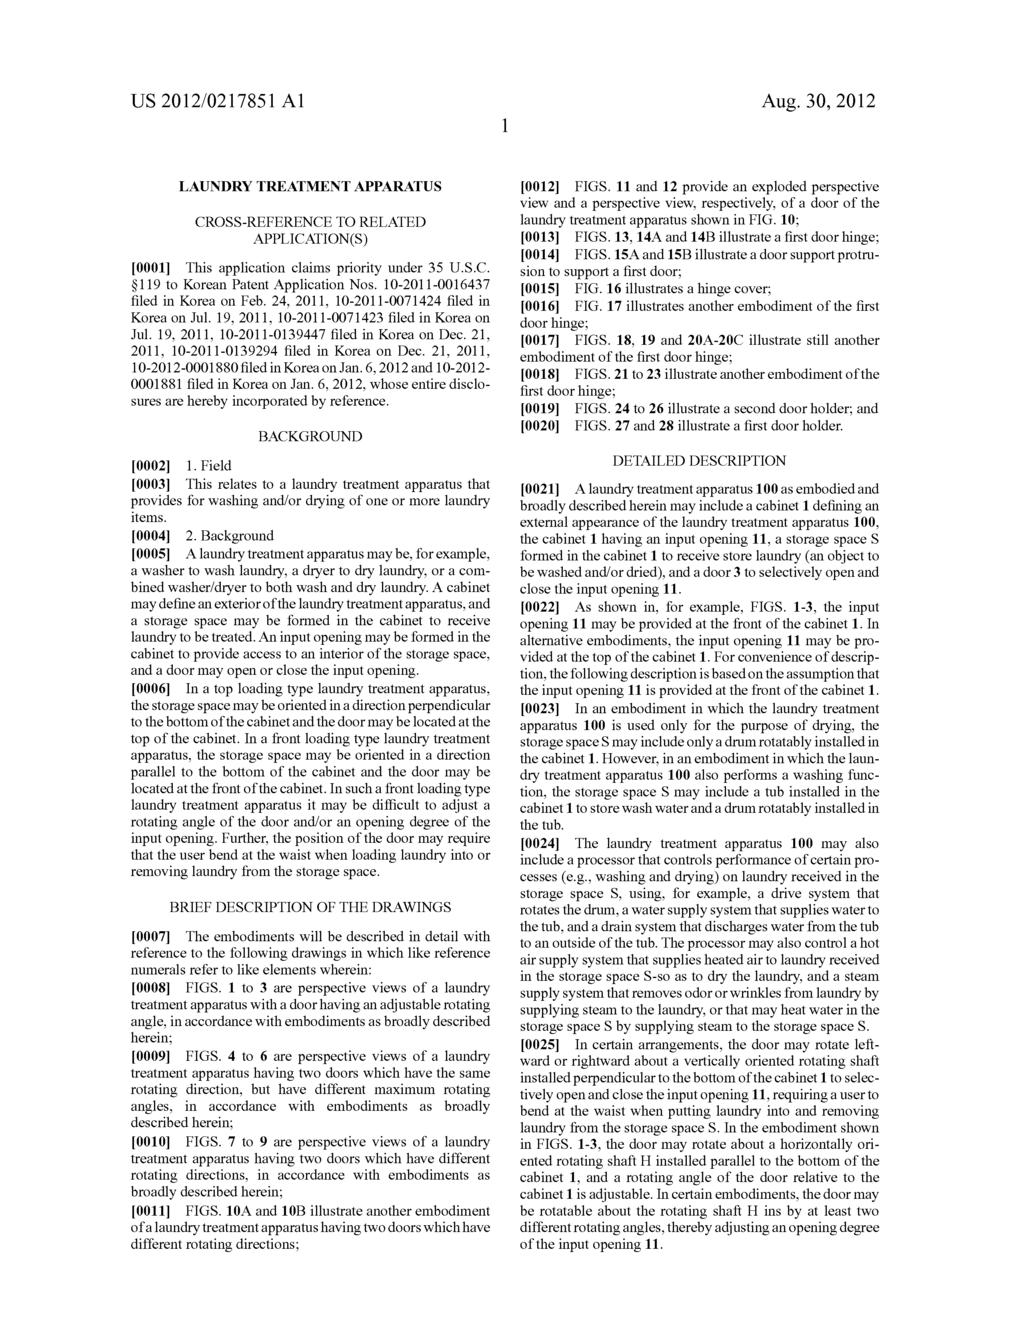 US 2012/0217851 A1 Aug. 30, 2012 LAUNDRY TREATMENT APPARATUS CROSS-REFERENCE TO RELATED APPLICATION(S) 0001. This application claims priority under 35 U.S.C. S119 to Korean Patent Application Nos.